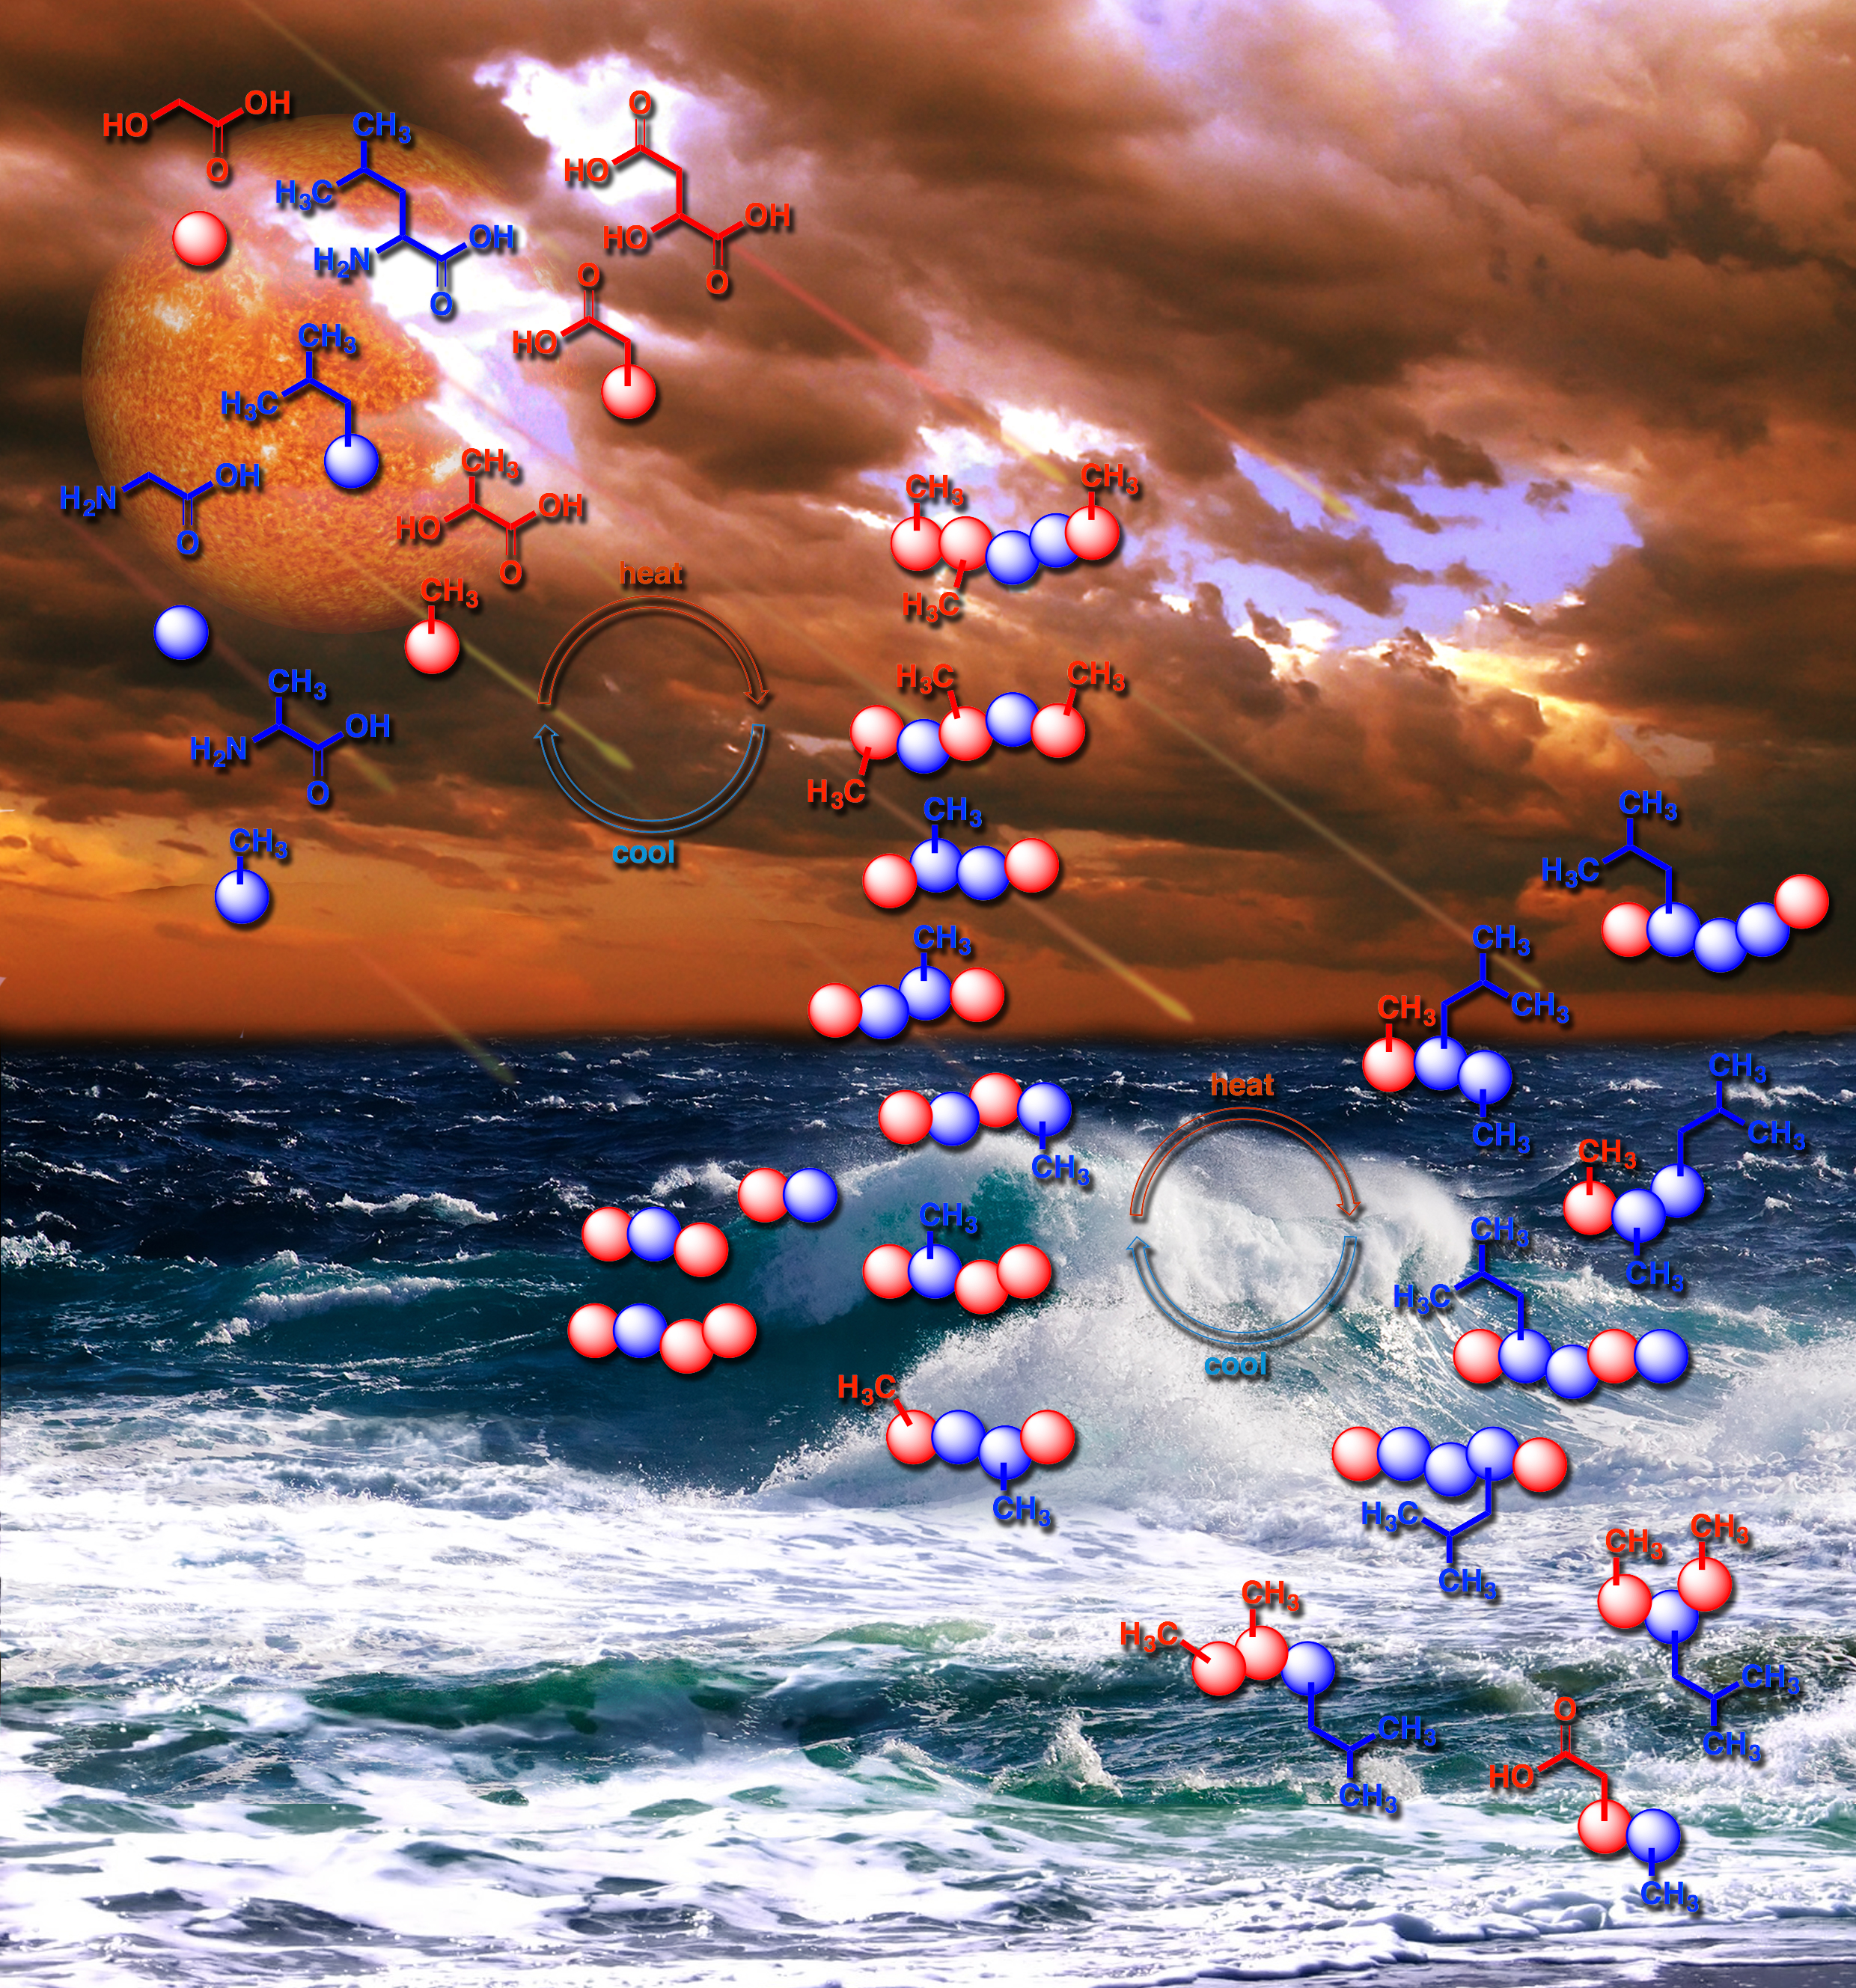 The first polymers of life may have arisen by a daily process still observed on Earth today, such as the repeated drying and refilling of pond water. Credit: Karl Magnacca, John Boyer/SXC, bearfotos/Freepik, Vecteezy.com, and NASA Goddard Photo and Video / Center for Chemical Evolution